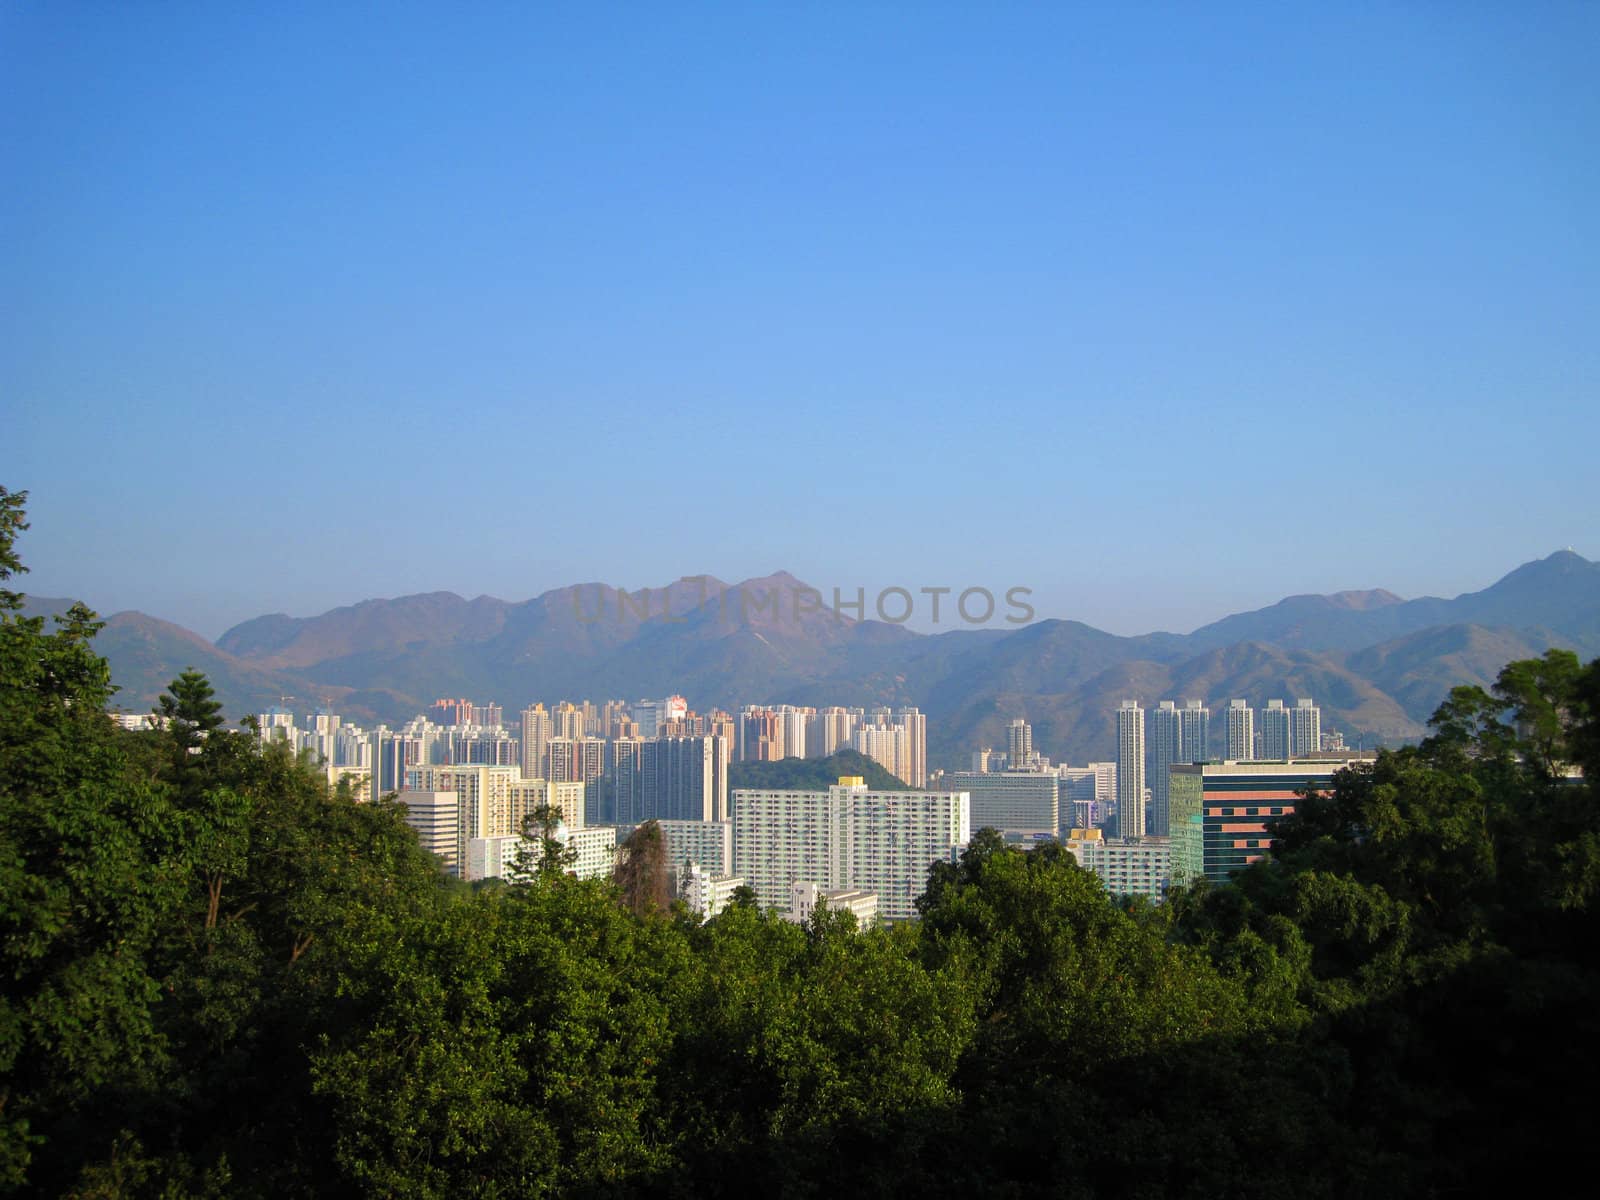 View of Hong Kong with many buildings, skyscrapers and mountains